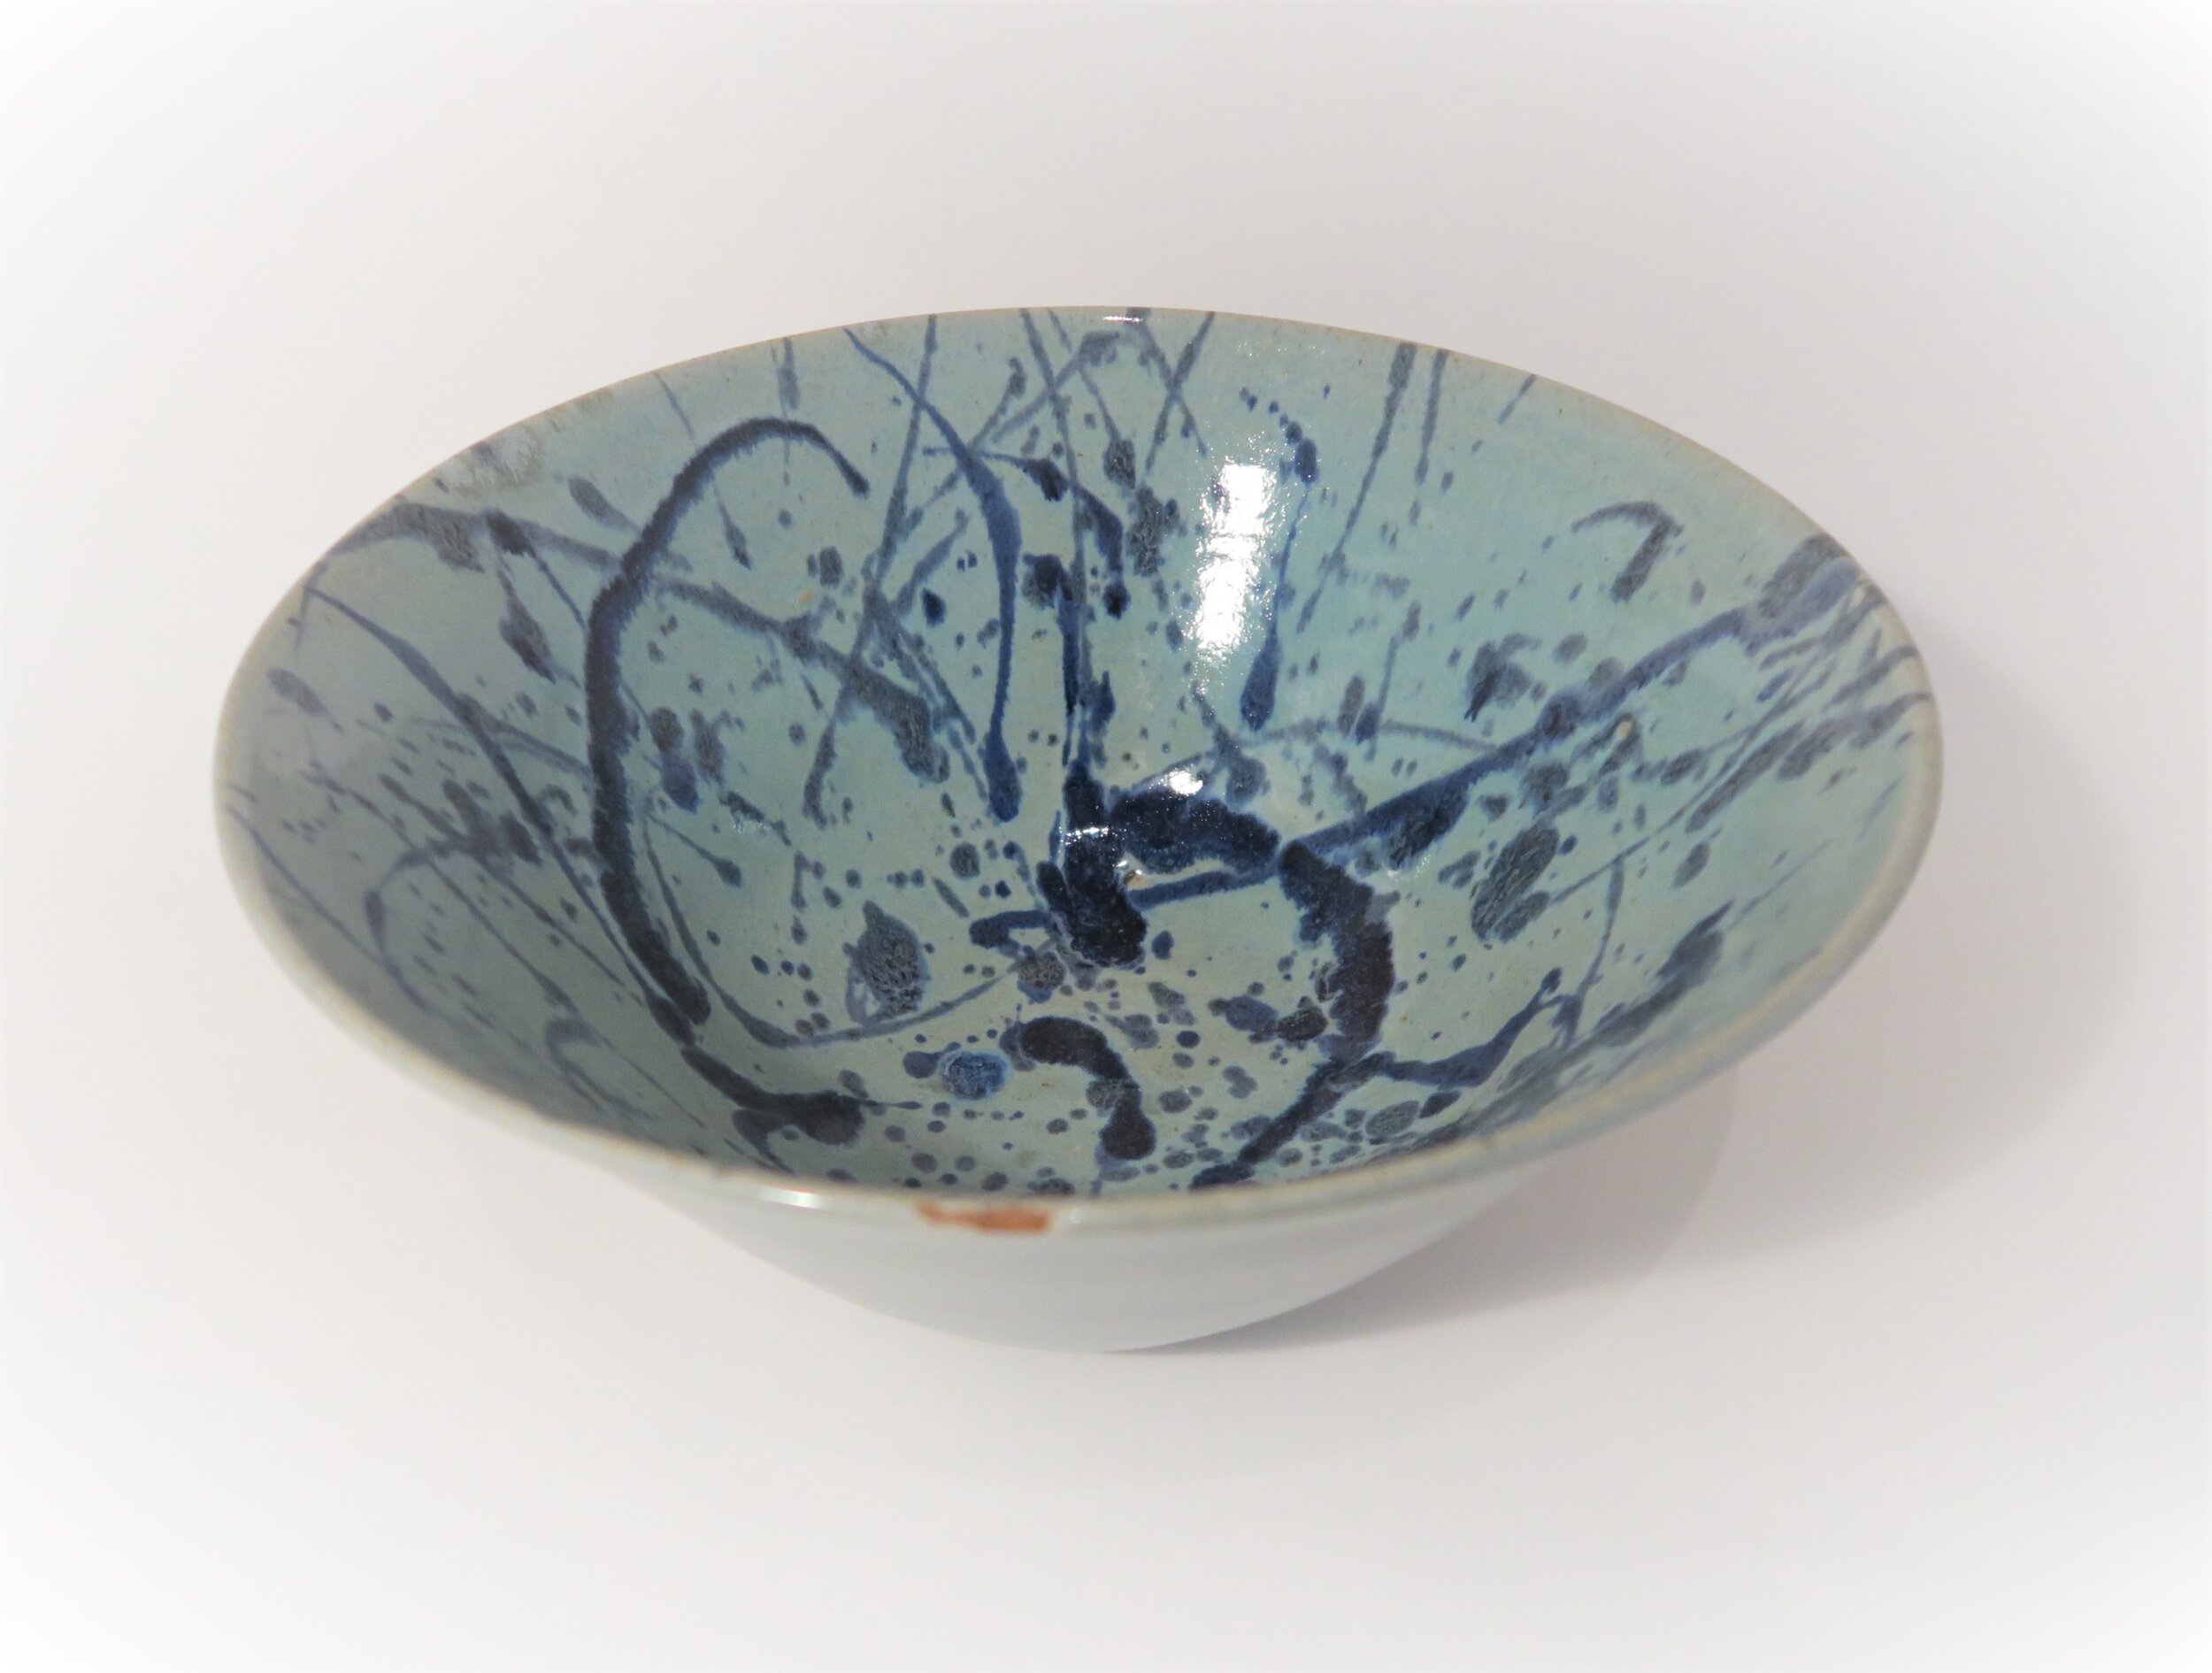 2018-80 Thrown stoneware bowl  1 Sold to Nicky and Geoff March 2019 3 (2).JPG